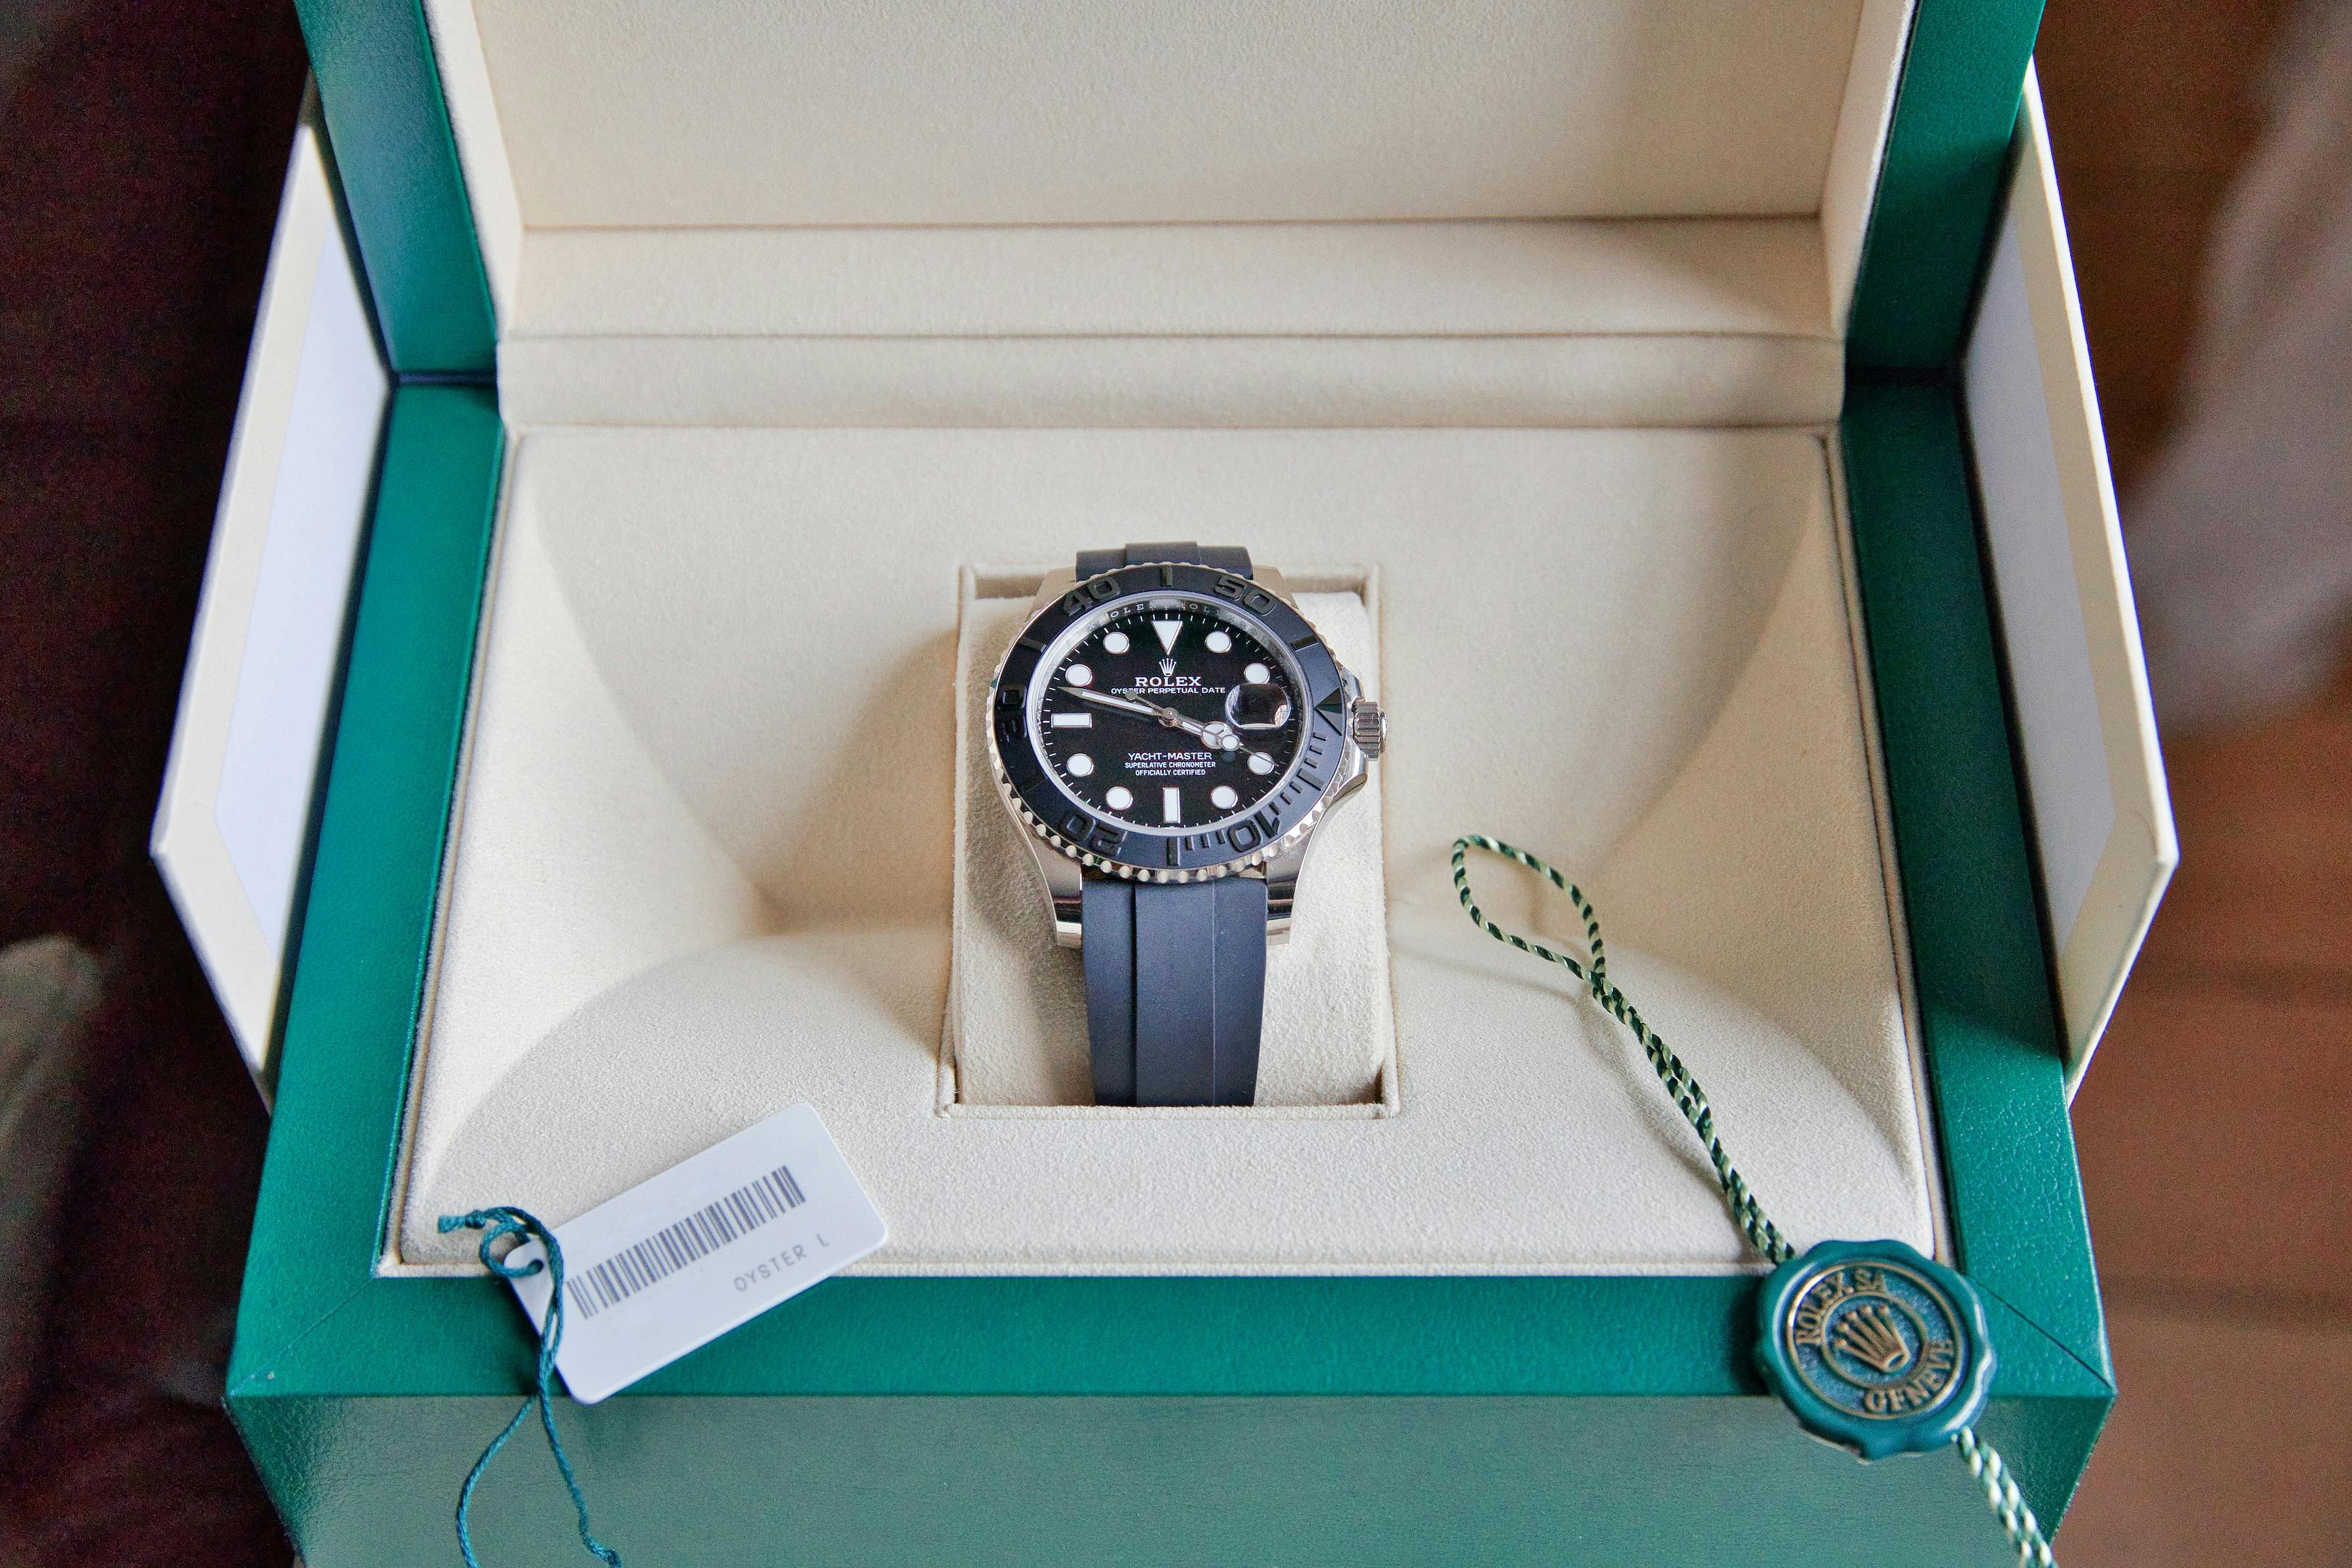 2022 ROLEX YACHT-MASTER 42 for sale by auction in Oxford, Oxfordshire,  United Kingdom